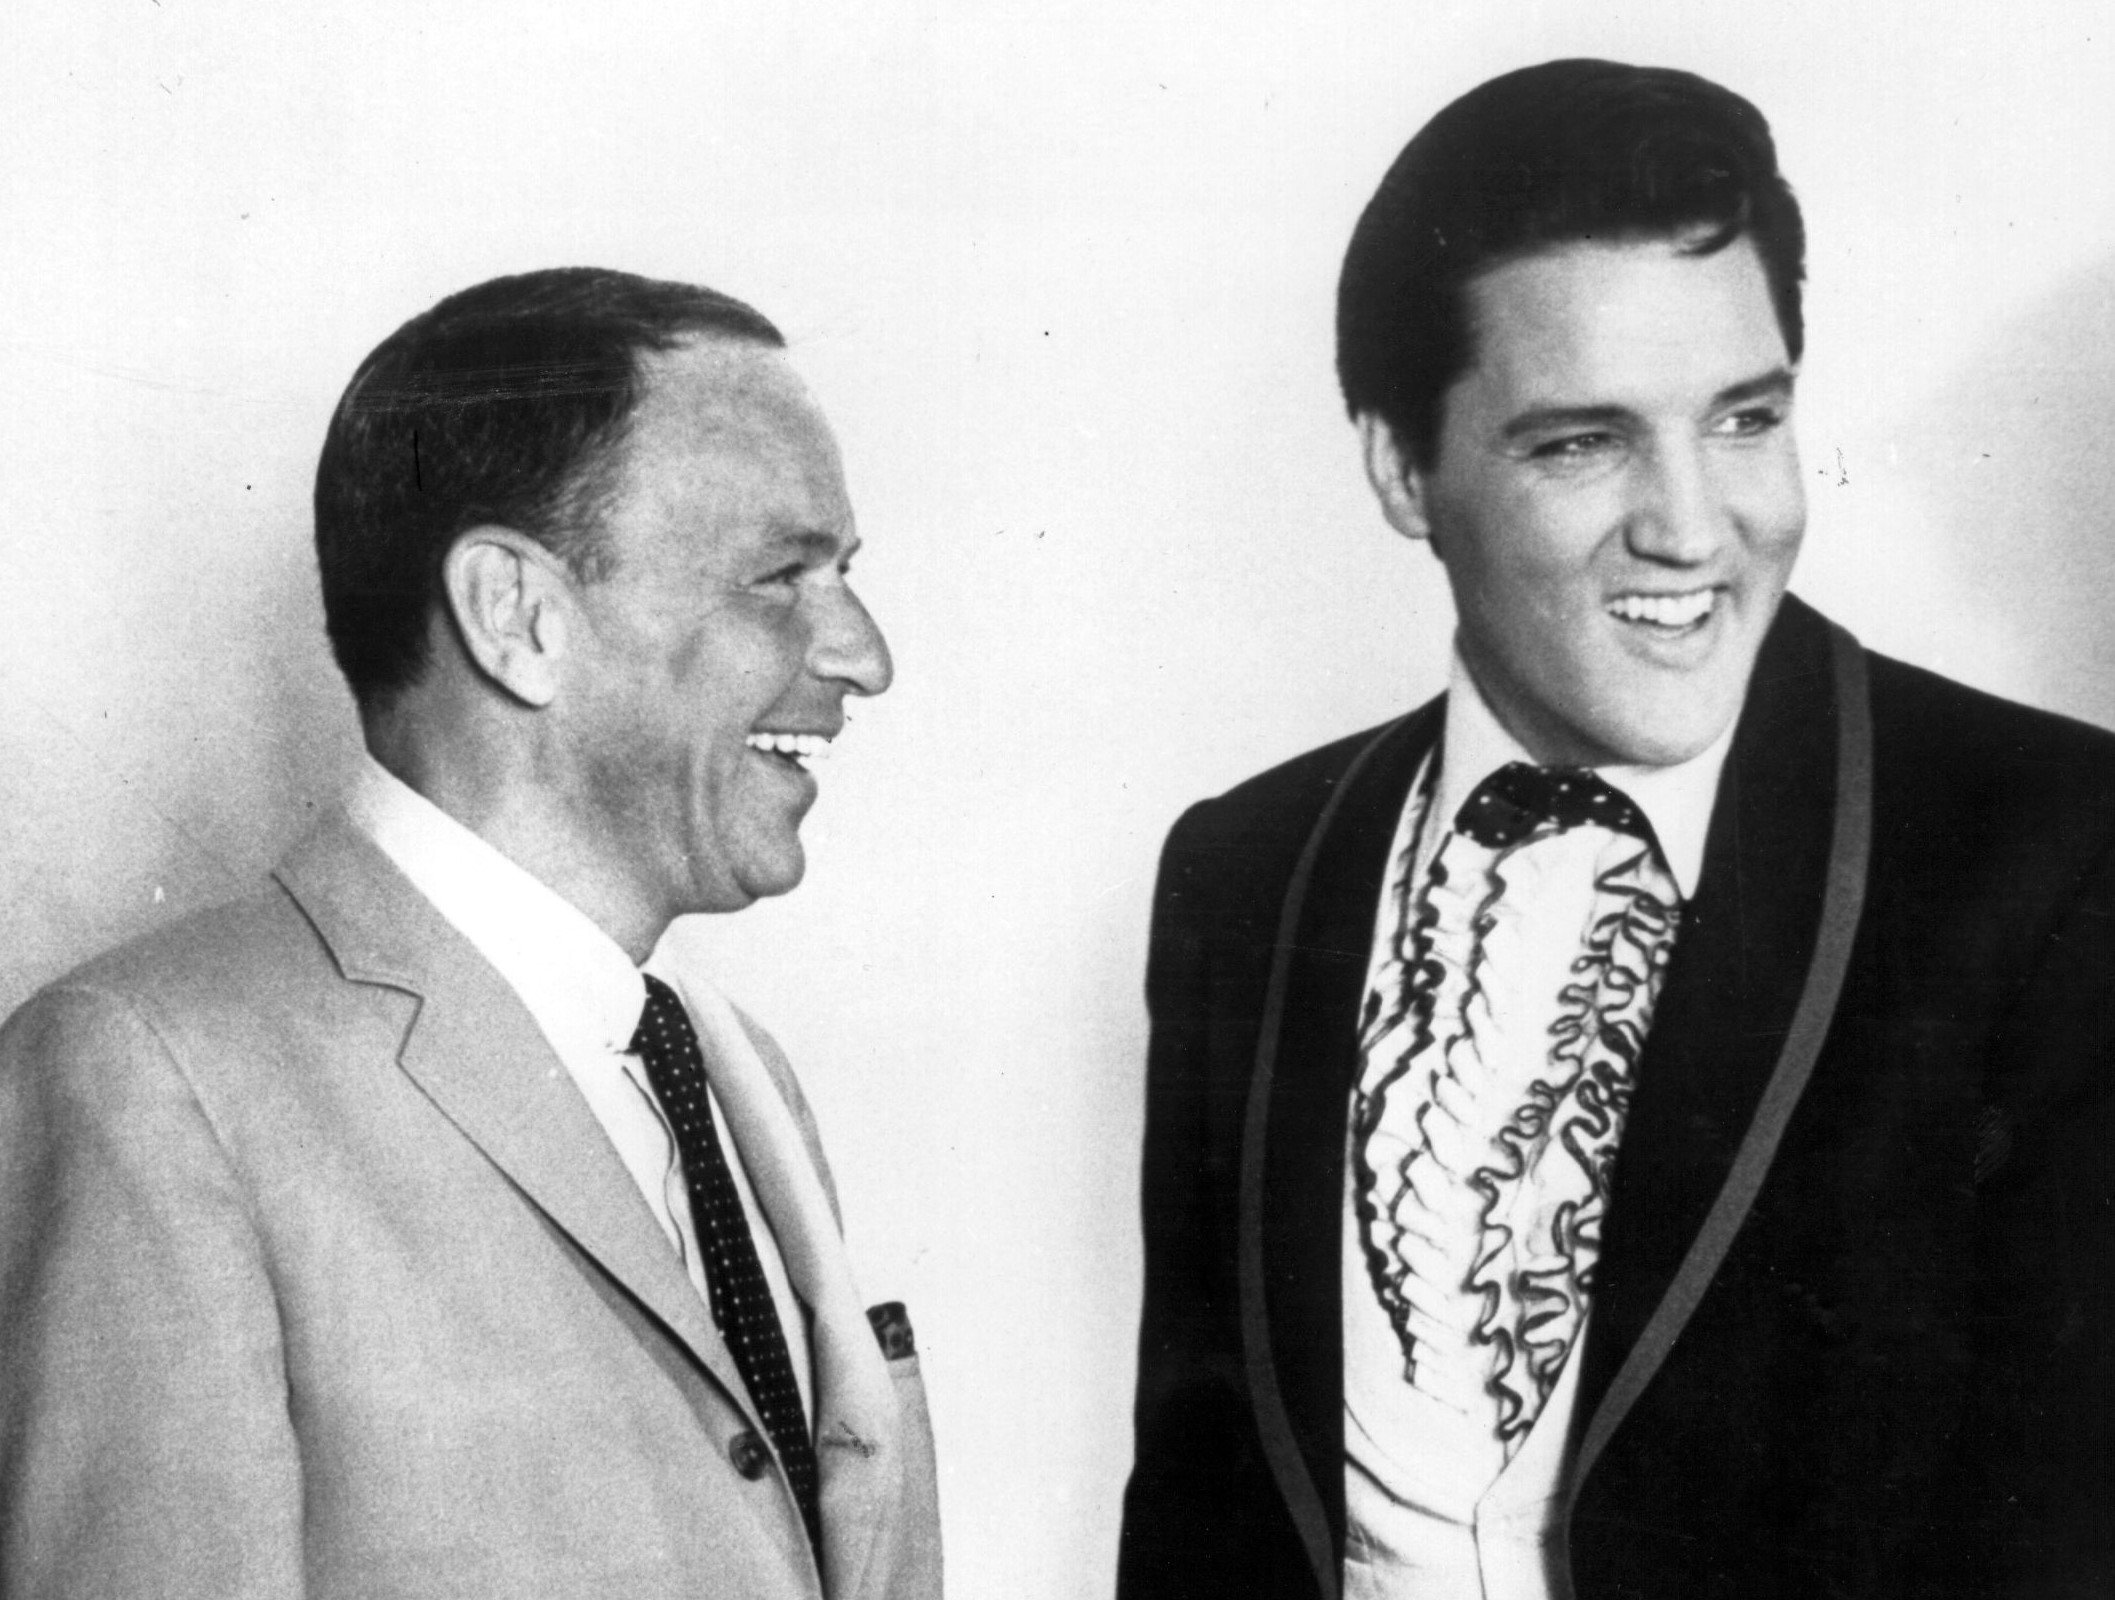 A black and white picture of Frank Sinatra and Elvis wearing suits and smiling.